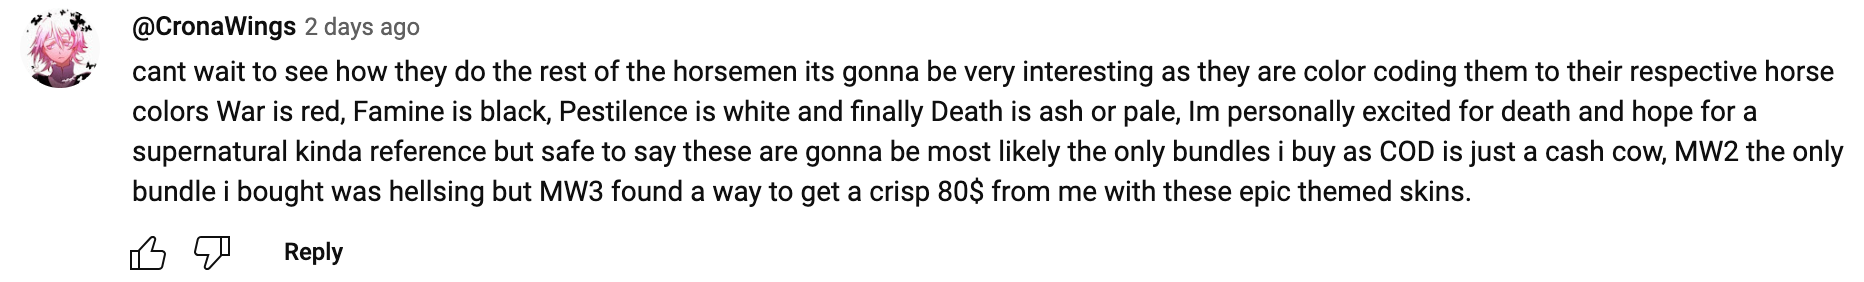 YouTube comment excited for future bundles Horsemen War Bundle in MW3